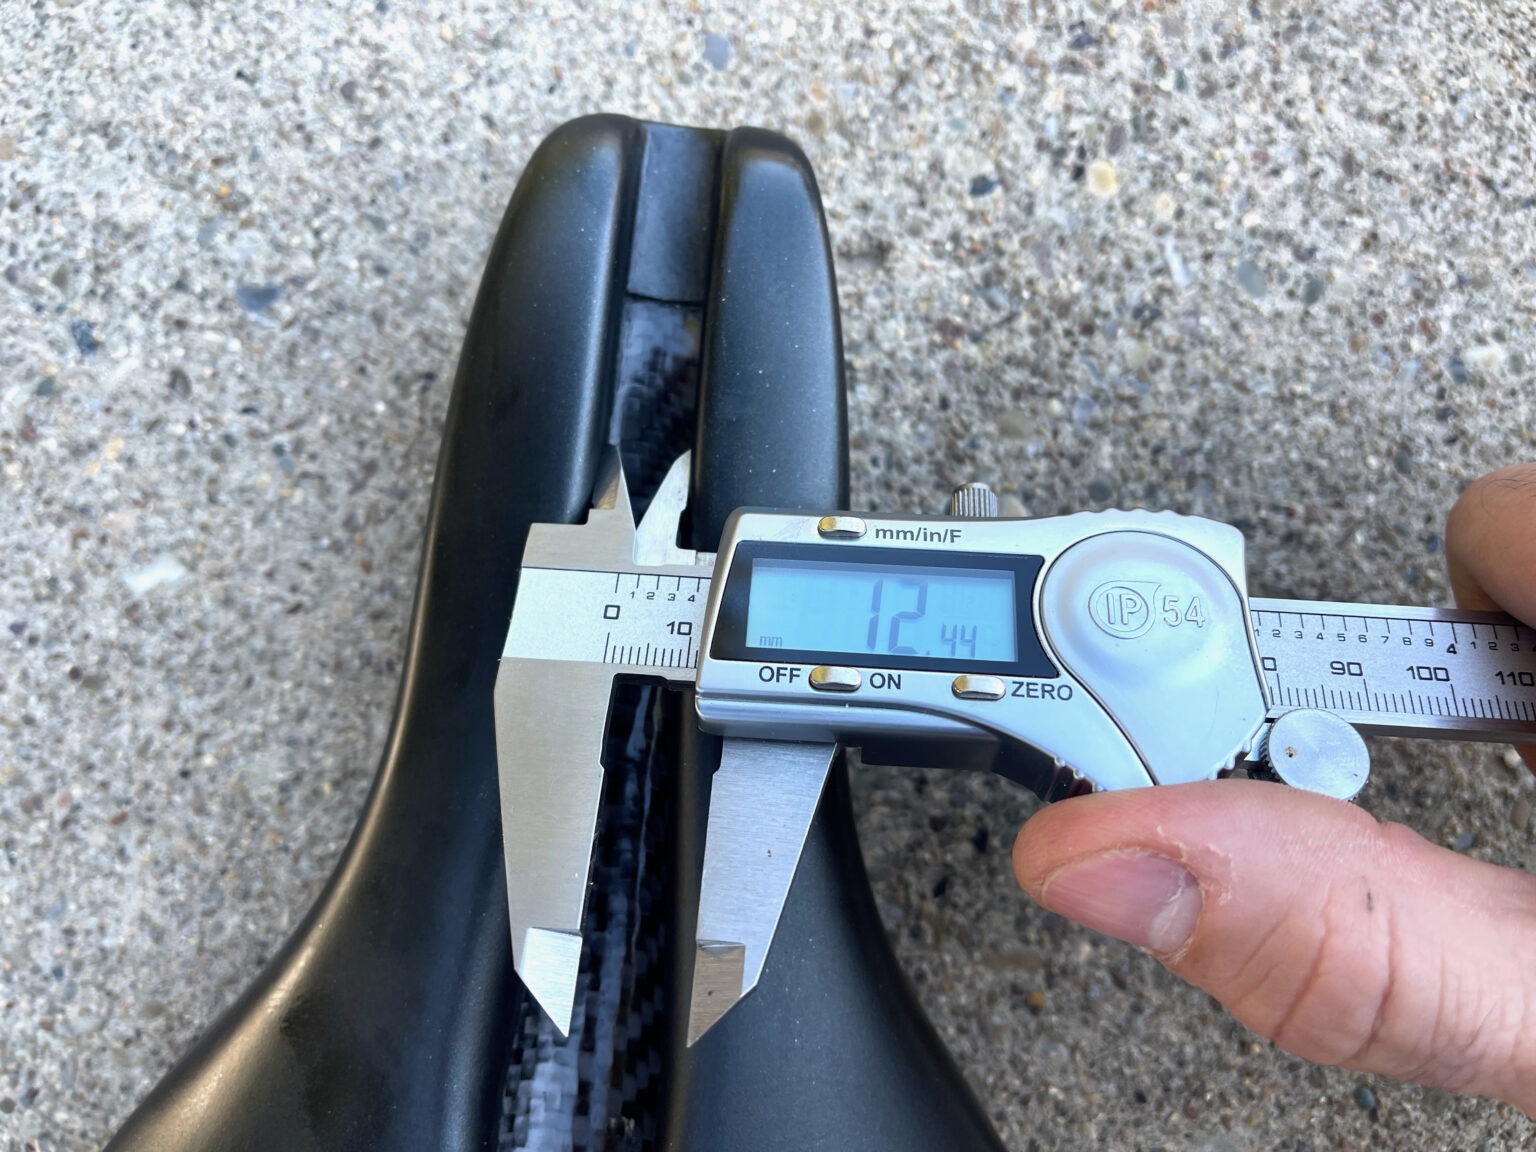 WOVE Mags Saddle Review detail number measurements channel